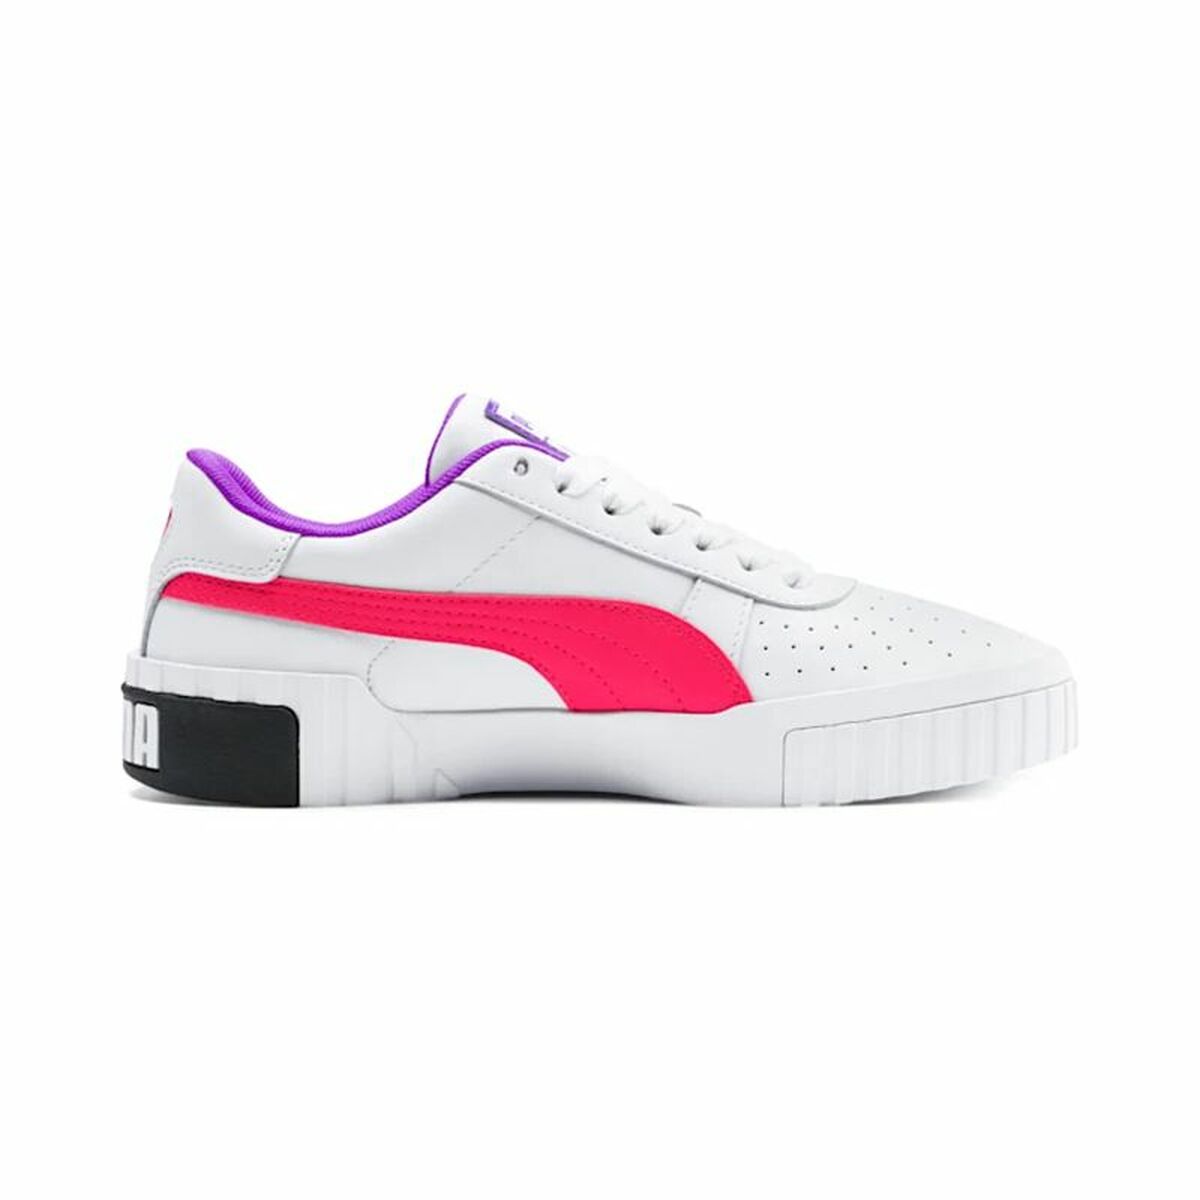 Sports Trainers for Women Puma Cali Chase White